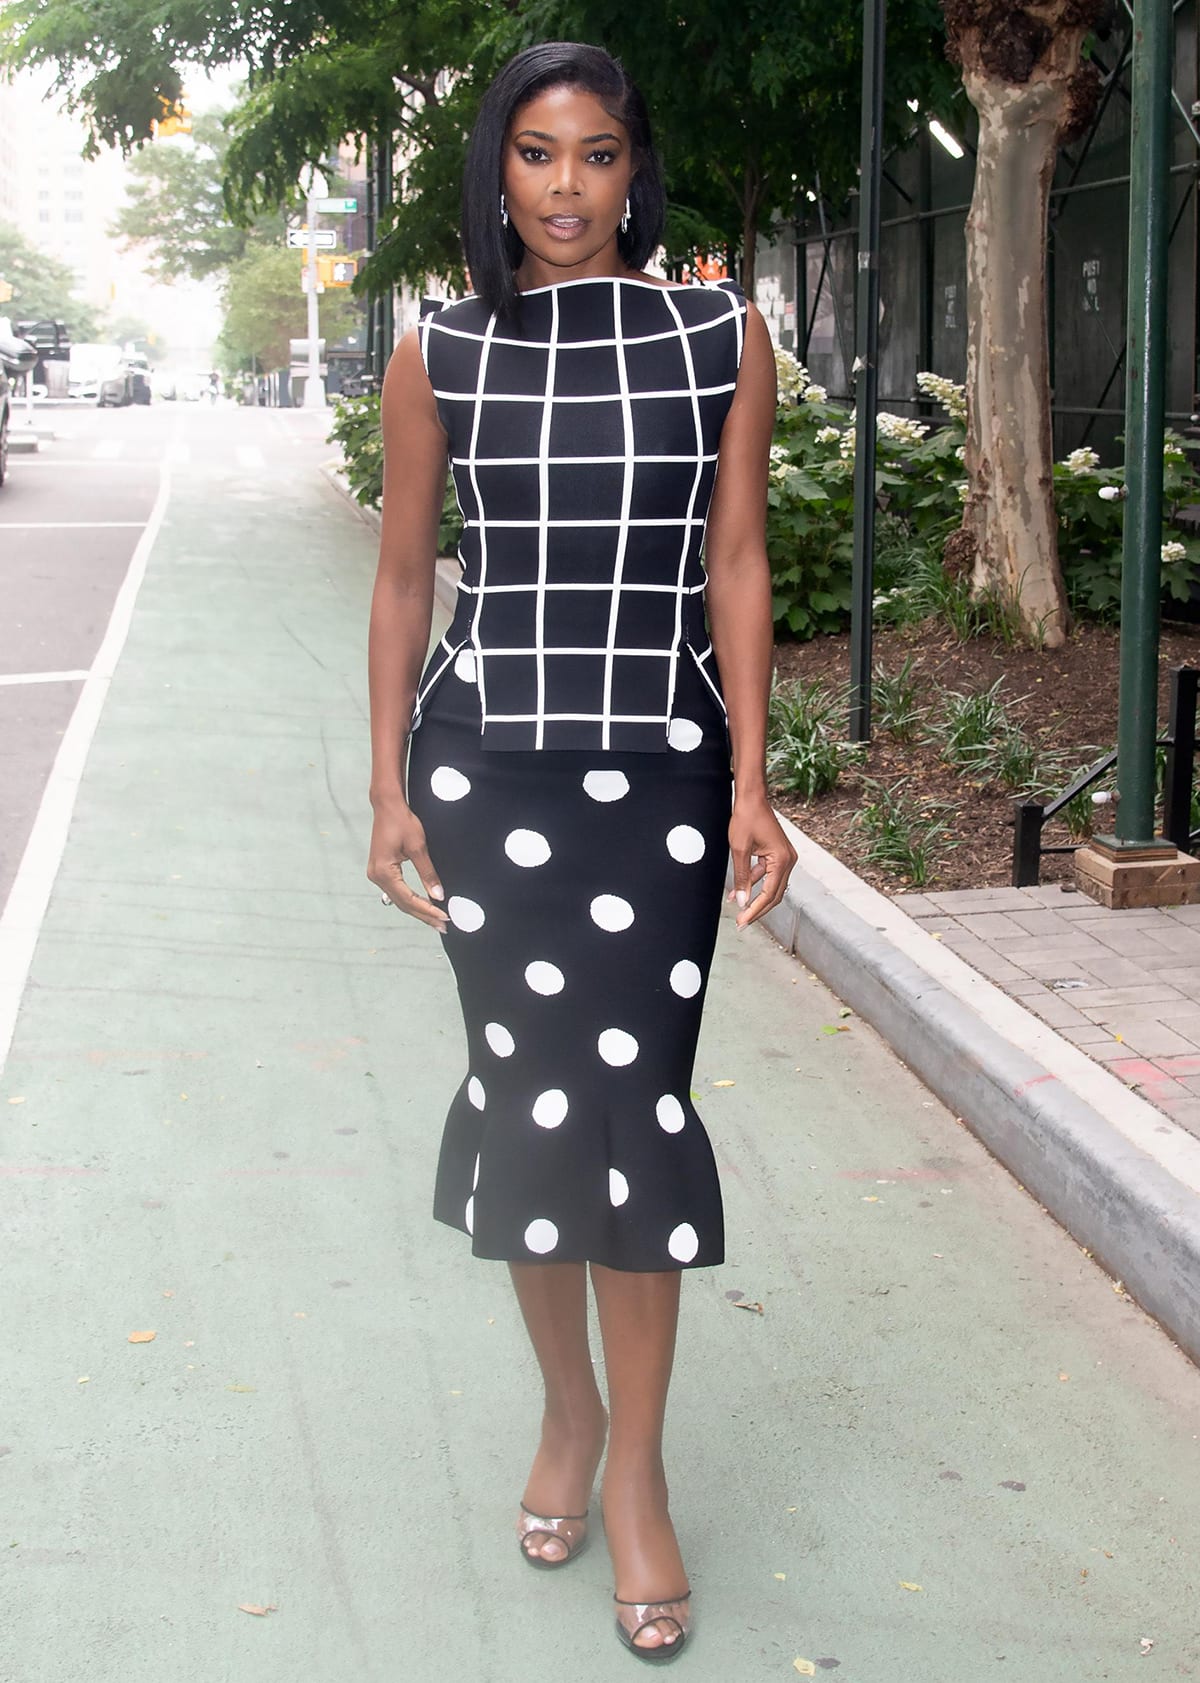 Gabrielle Union wears a mixed-pattern outfit composed of a checkerboard sleeveless top and a polka dot midi skirt to Watch Happens Live on June 12, 2023